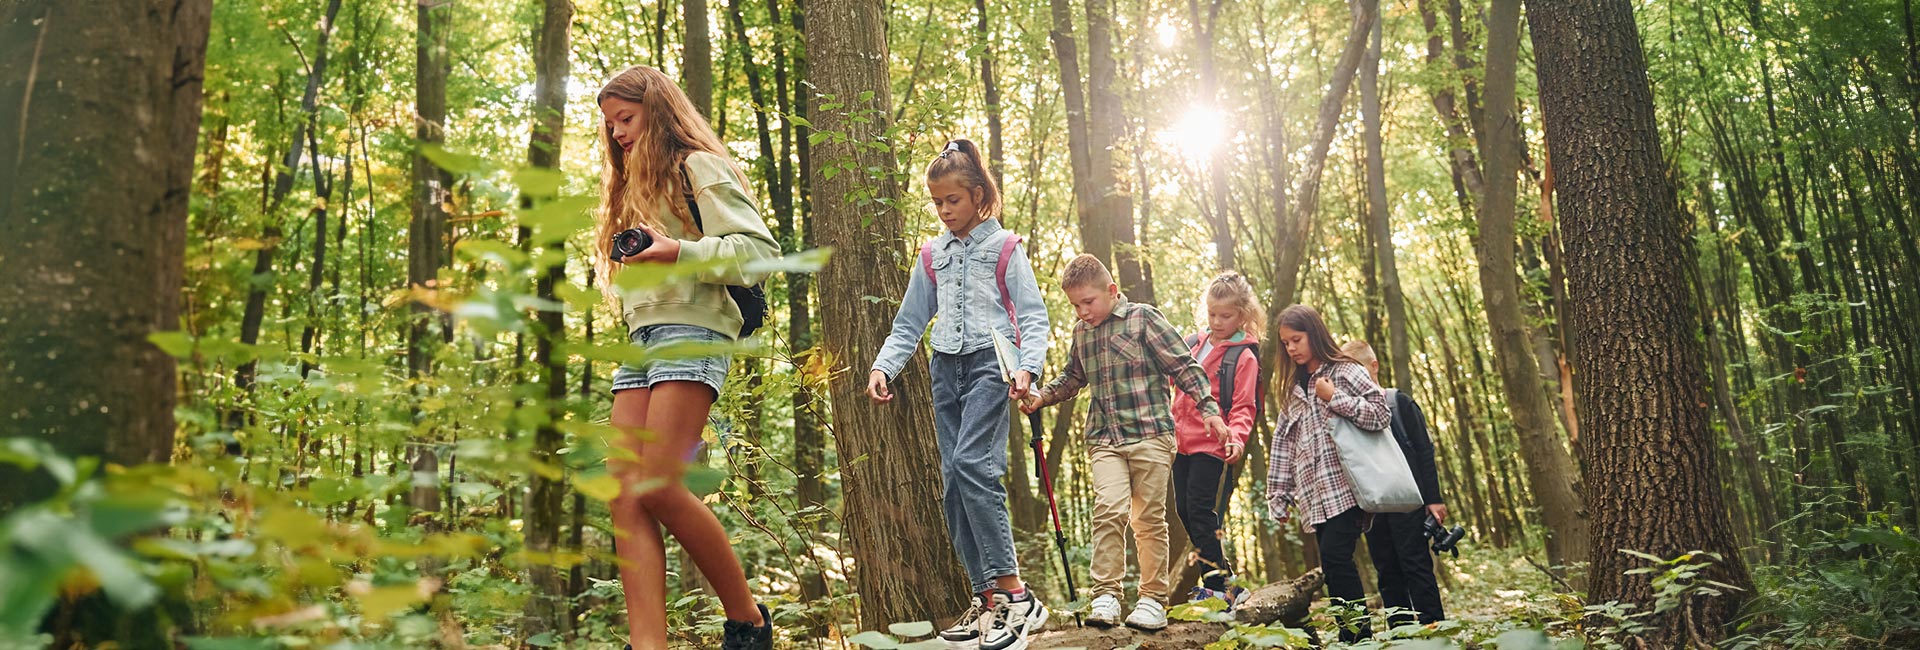 A group of children walking together in nature